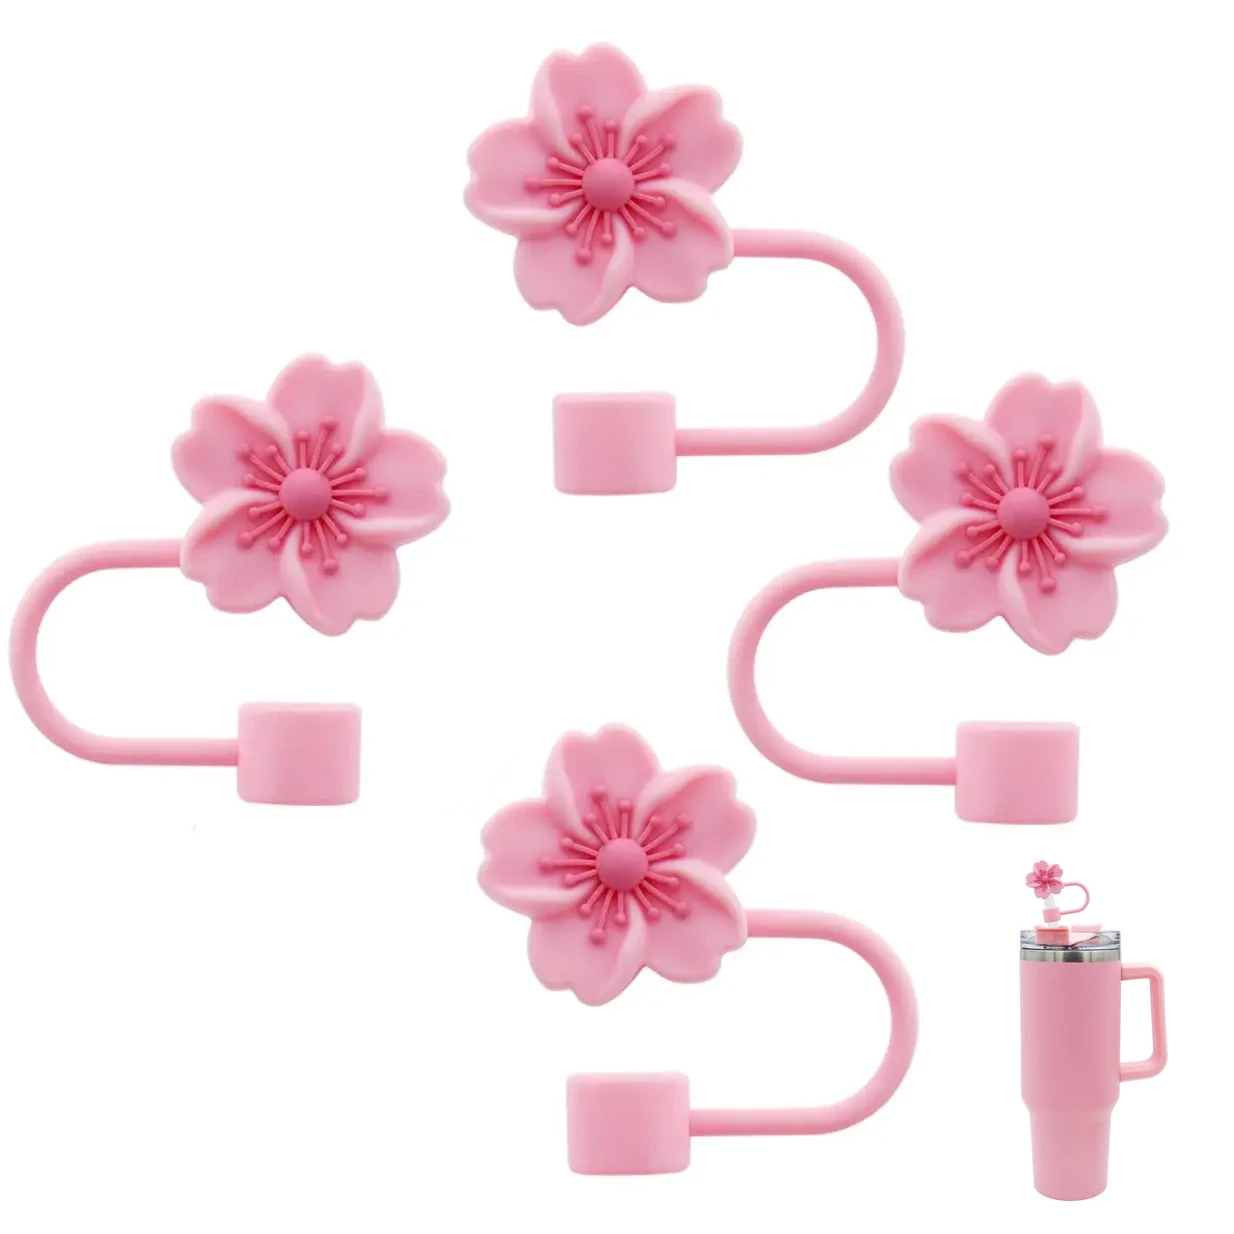 https://ae01.alicdn.com/kf/S2e6235e3307c458dbc318857a9ff1ffaz/4Pcs-0-4in-Diameter-Cute-Silicone-Straw-Covers-Cap-for-Stanley-Cup-Dust-Proof-Drinking-Straw.jpg